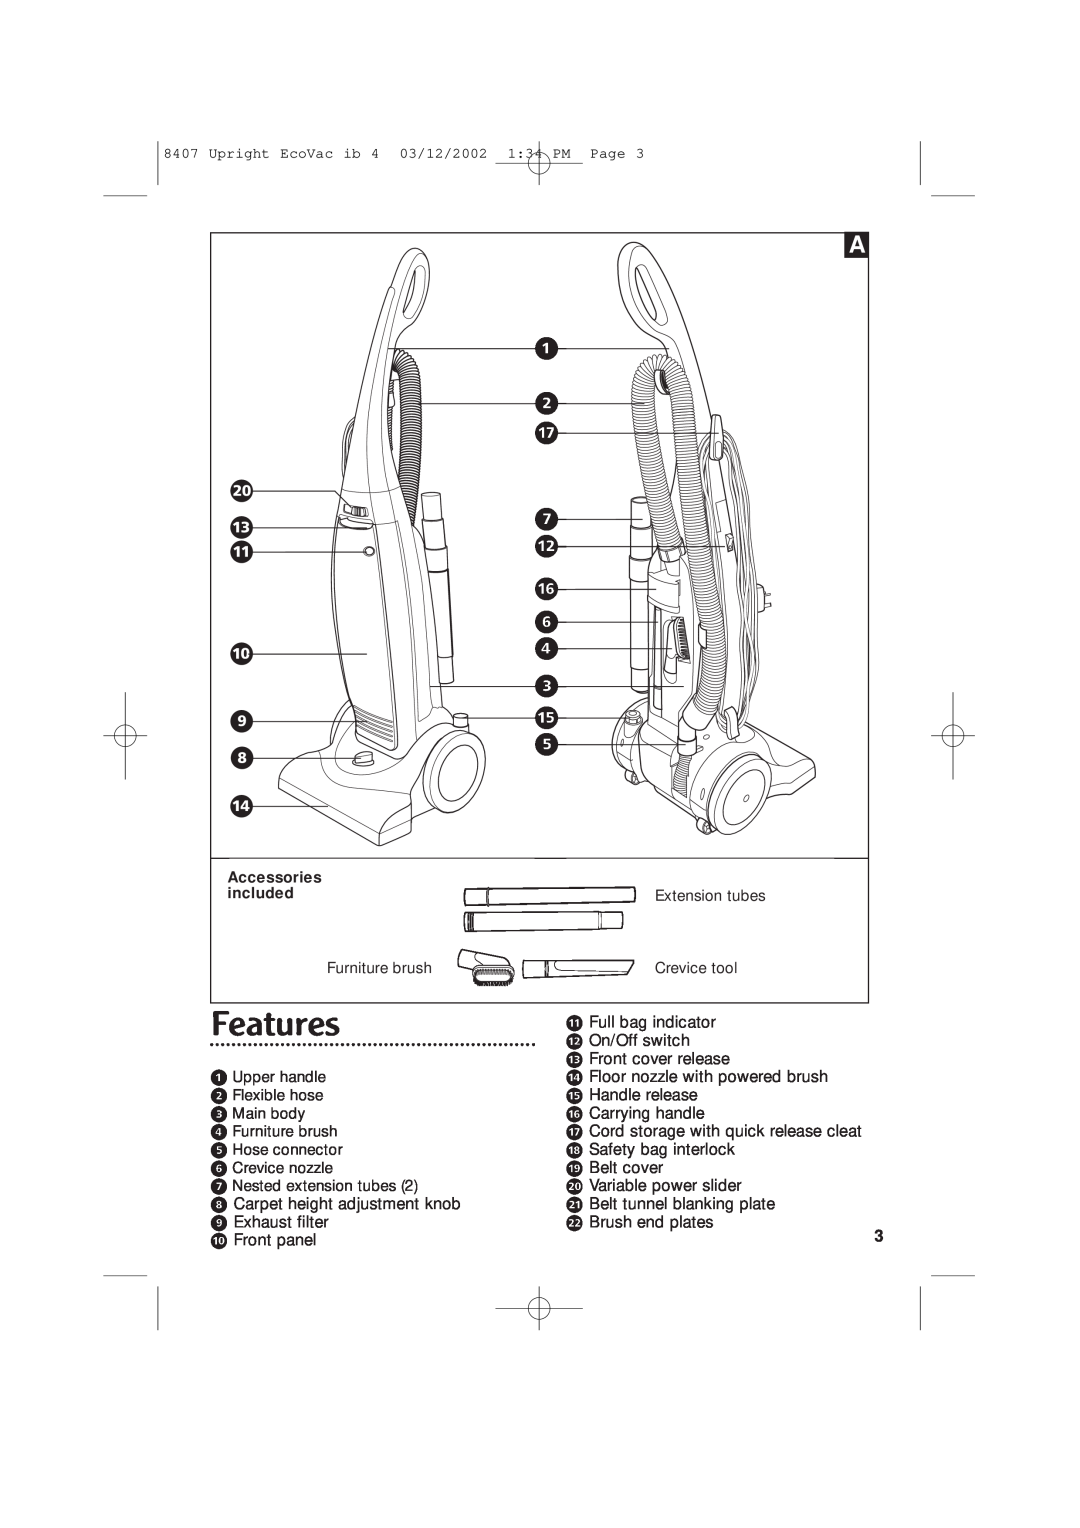 Morphy Richards Ecovac vacuum cleaner manual Features 